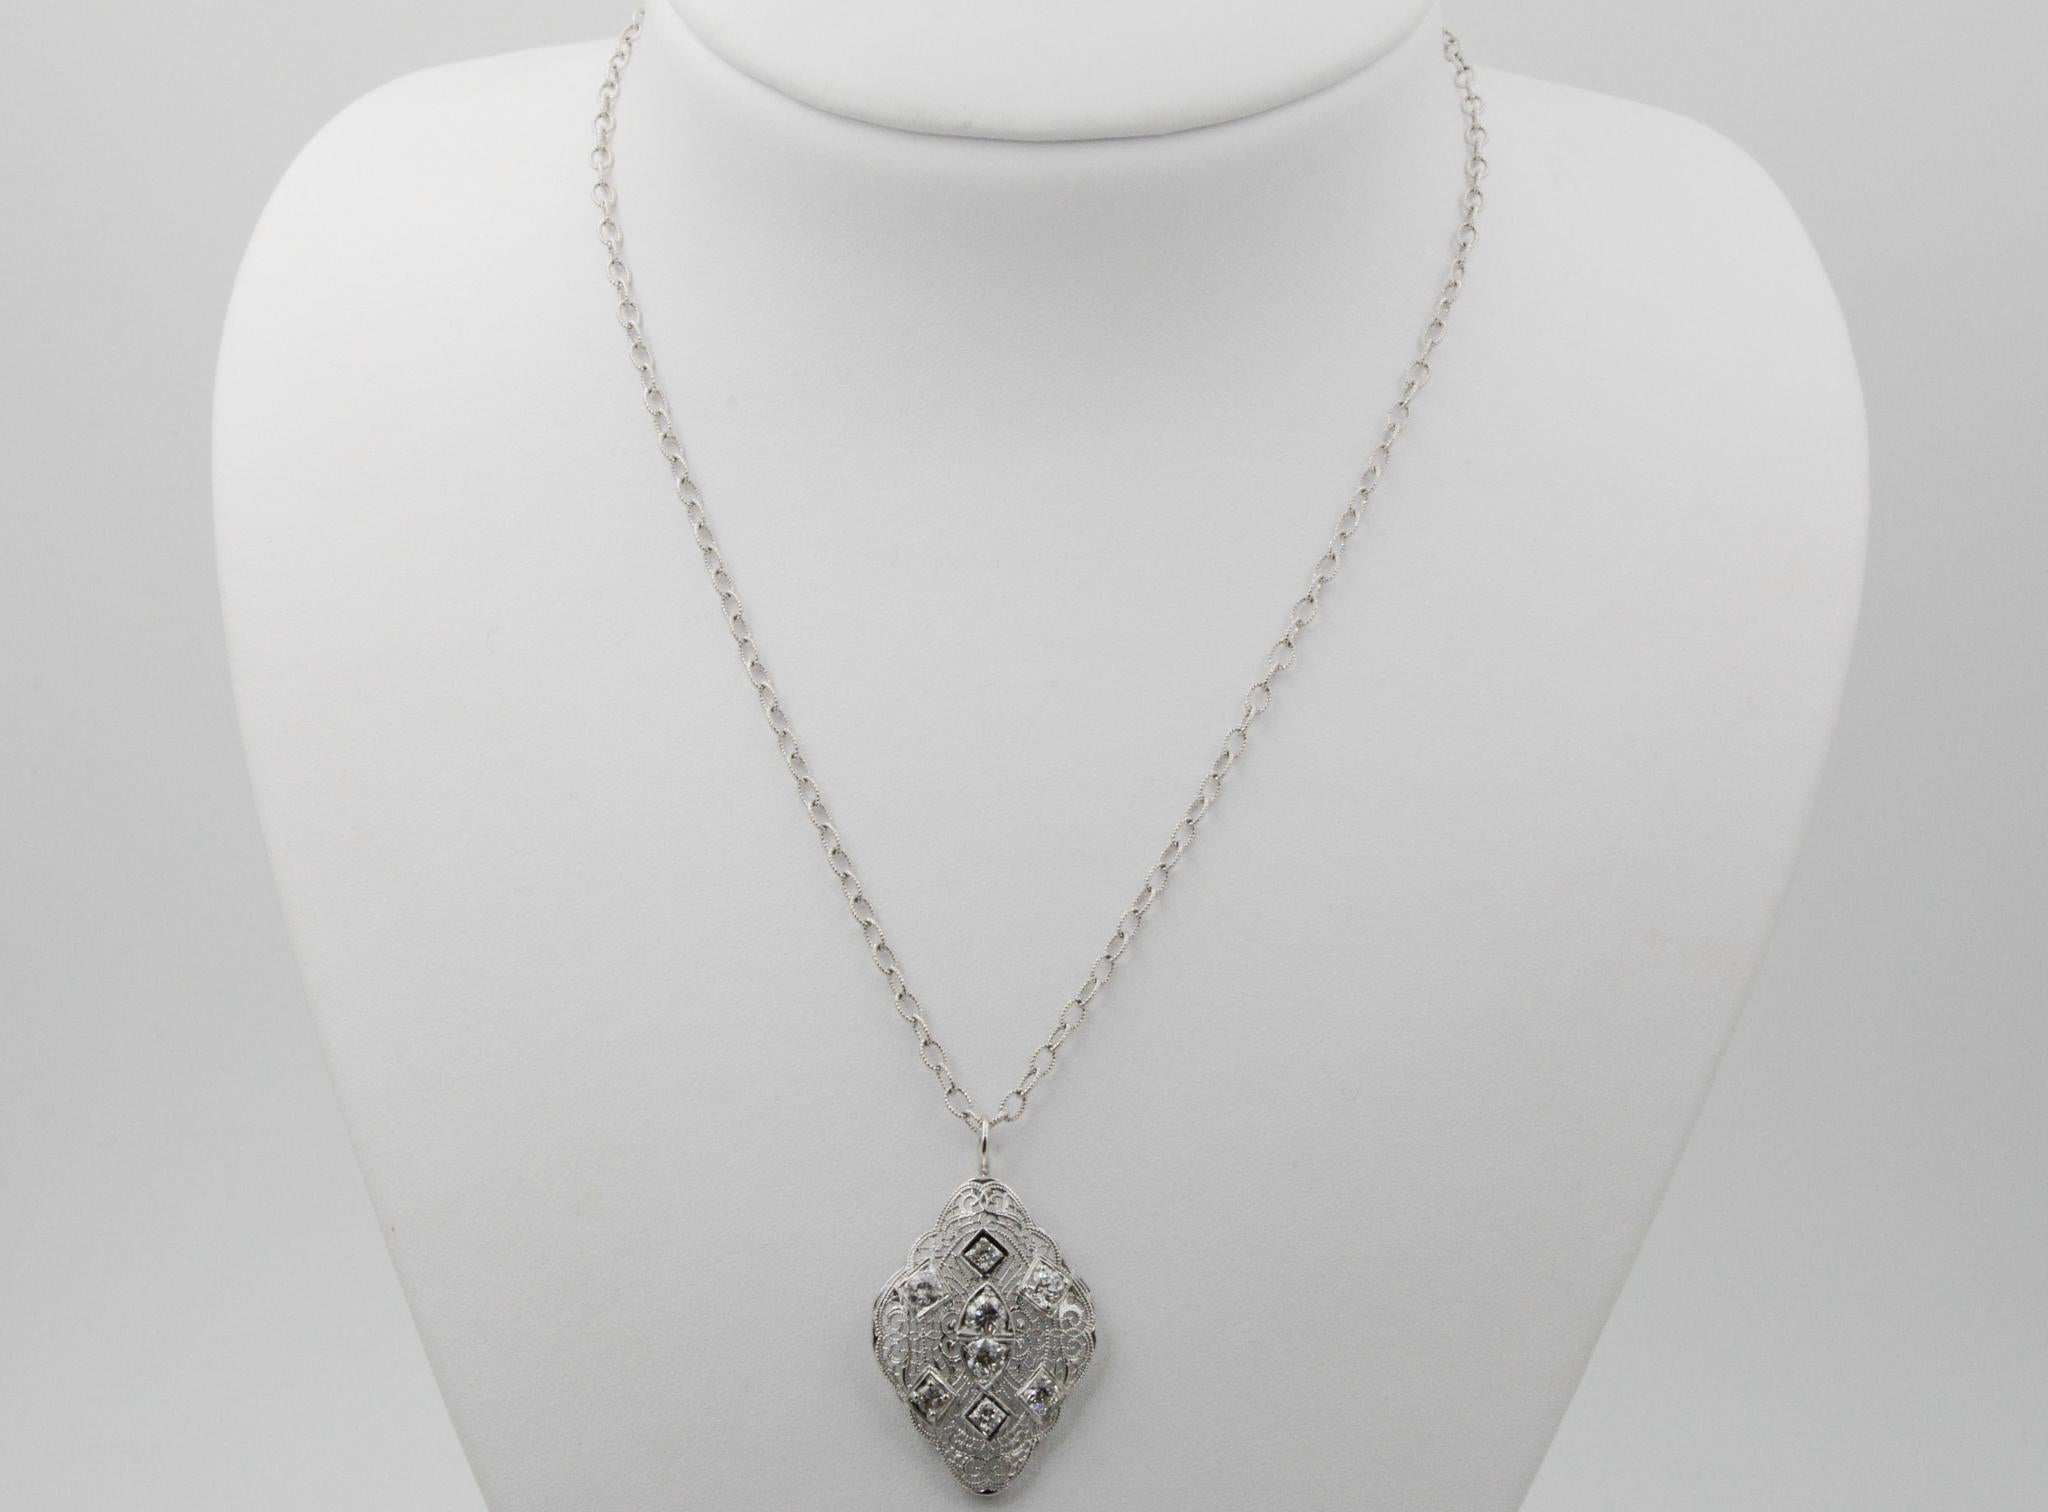 This 14 karat white gold filigree pendant features a dazzling vintage design with eight old European cut diamonds, weighing approximately 1.50 carats. The diamonds have I-J coloring and SI-I1 clarity. The pendant has an oval design with slightly